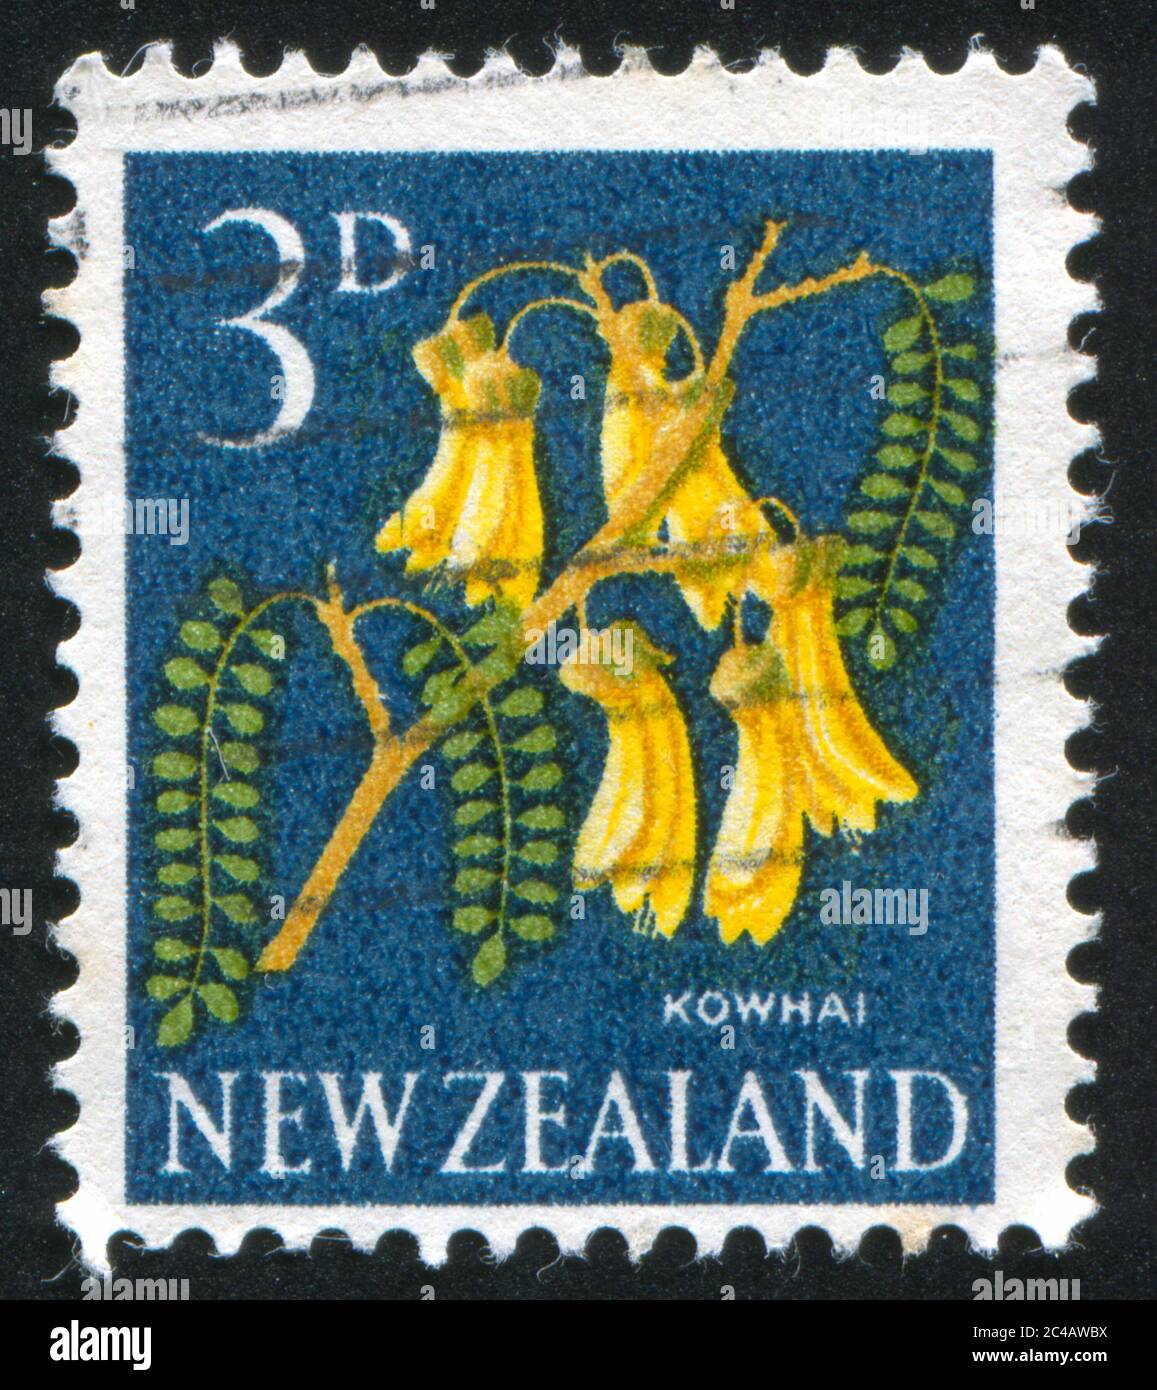 NEW ZEALAND - CIRCA 1960: stamp printed by New Zealand, shows Kowhai flower, circa 1960 Stock Photo